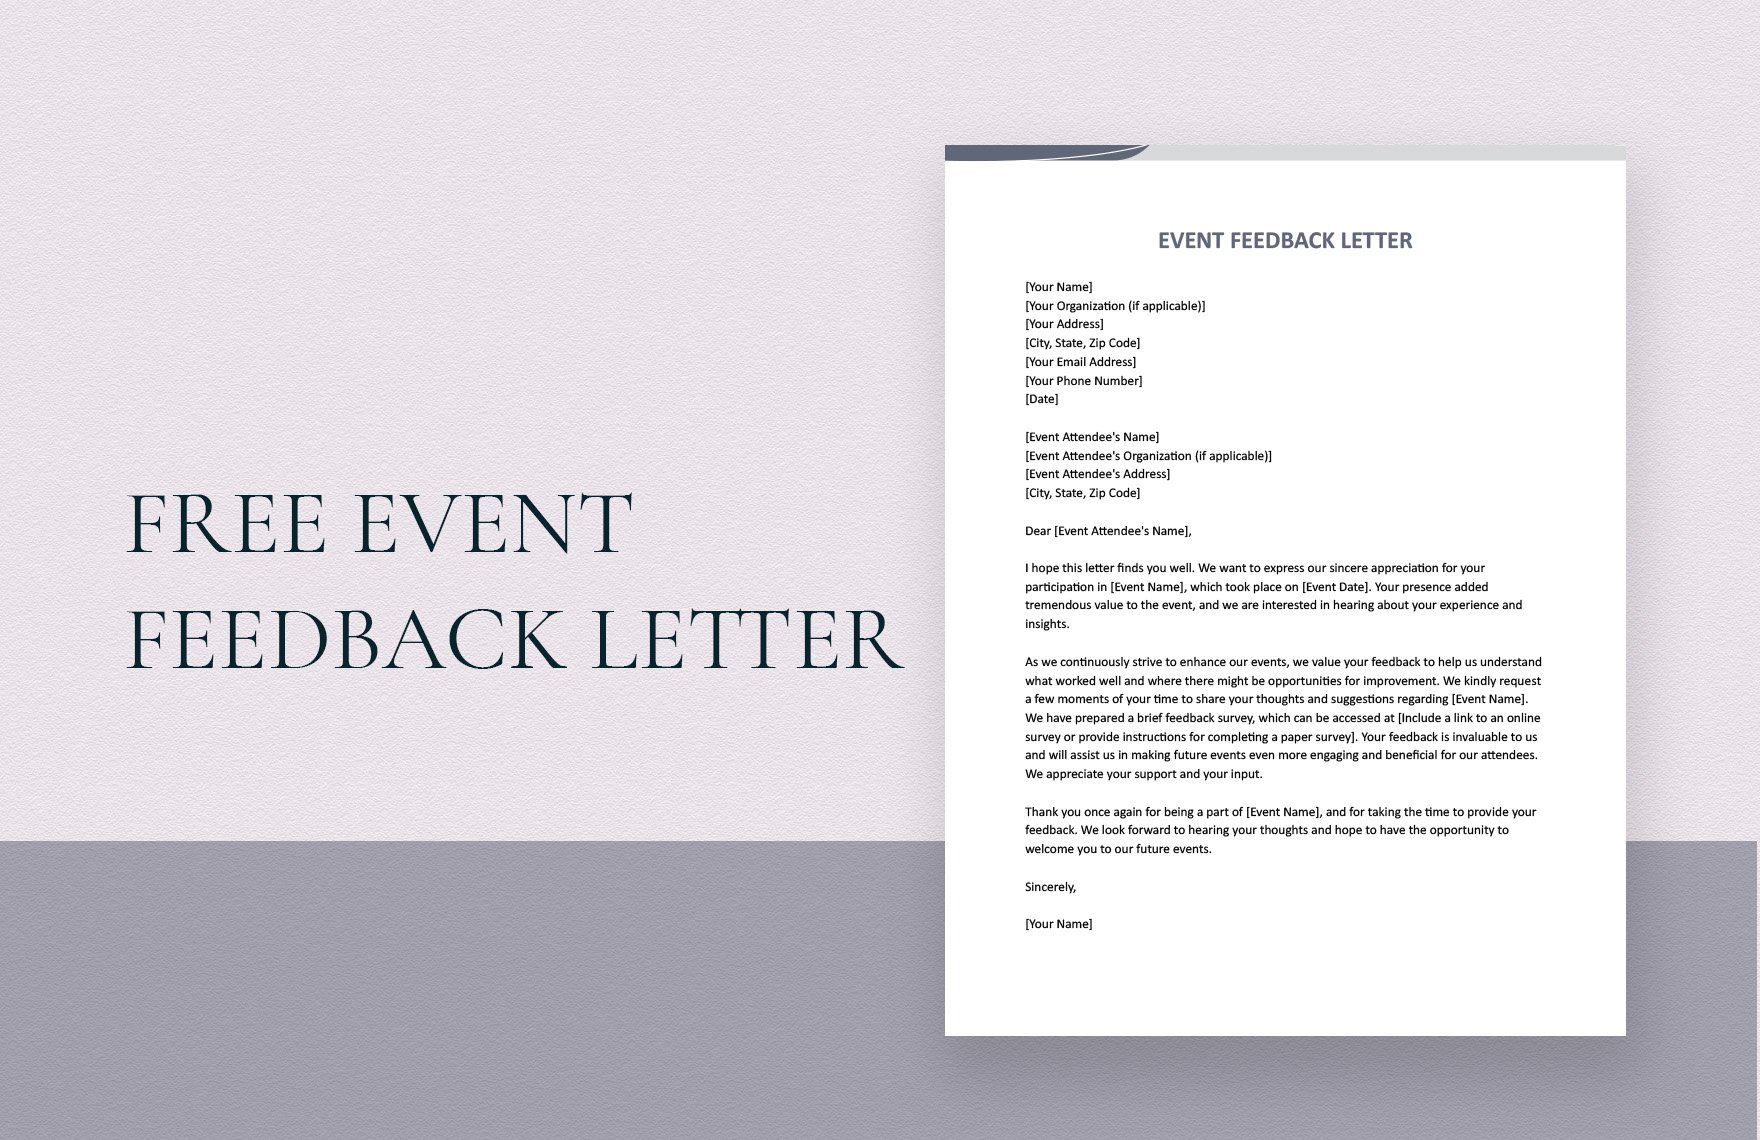 Event Feedback Letter in Word, Google Docs